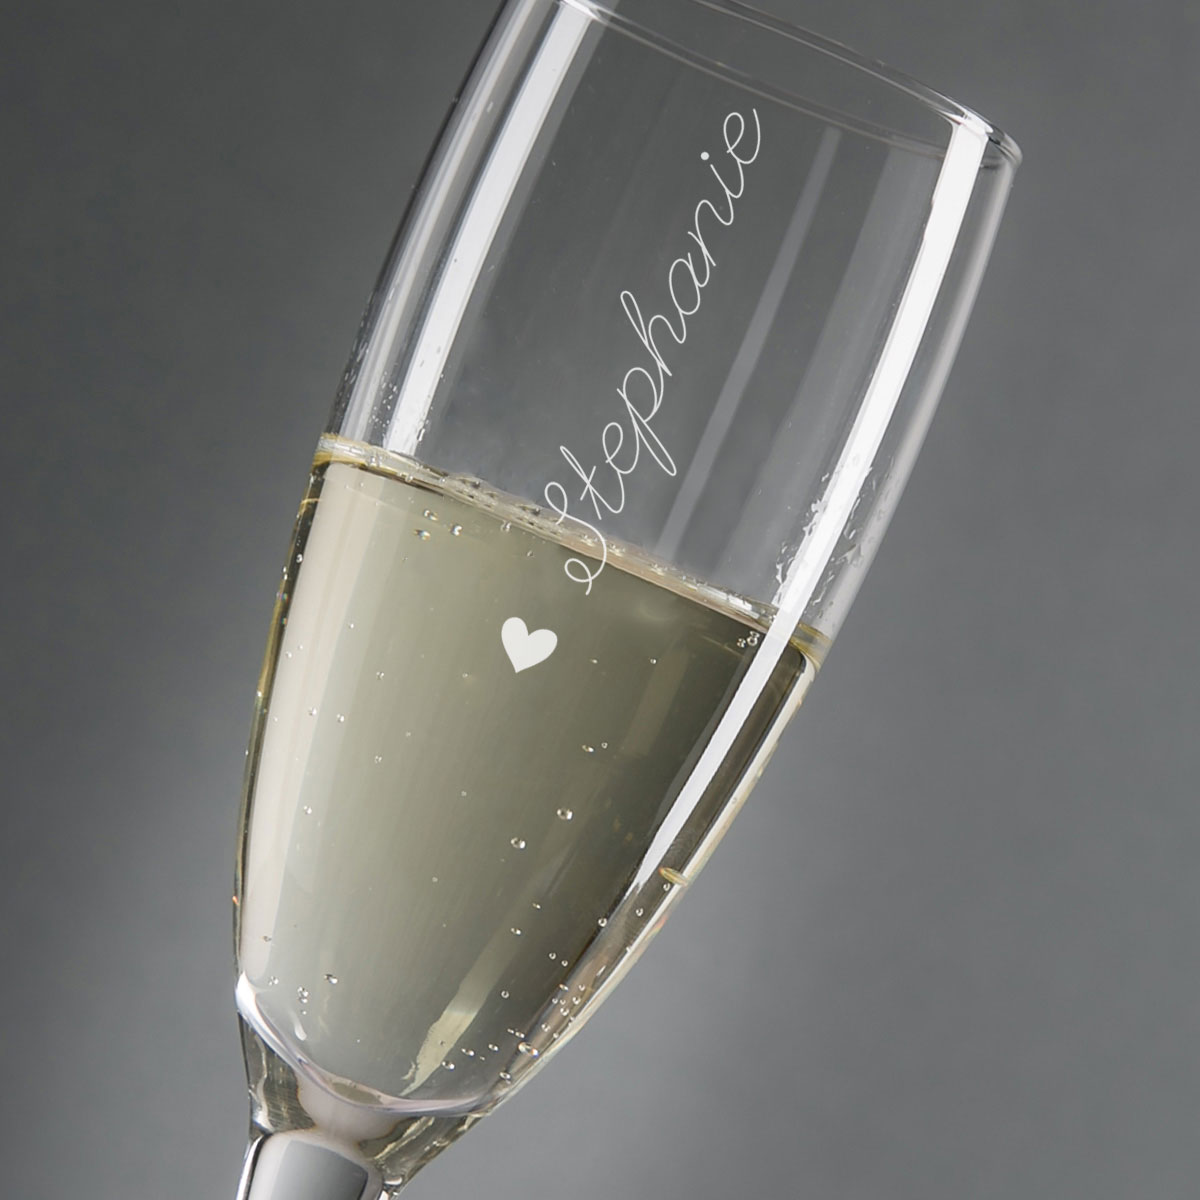 Personalised Champagne Flute - Heart & Name Wedding